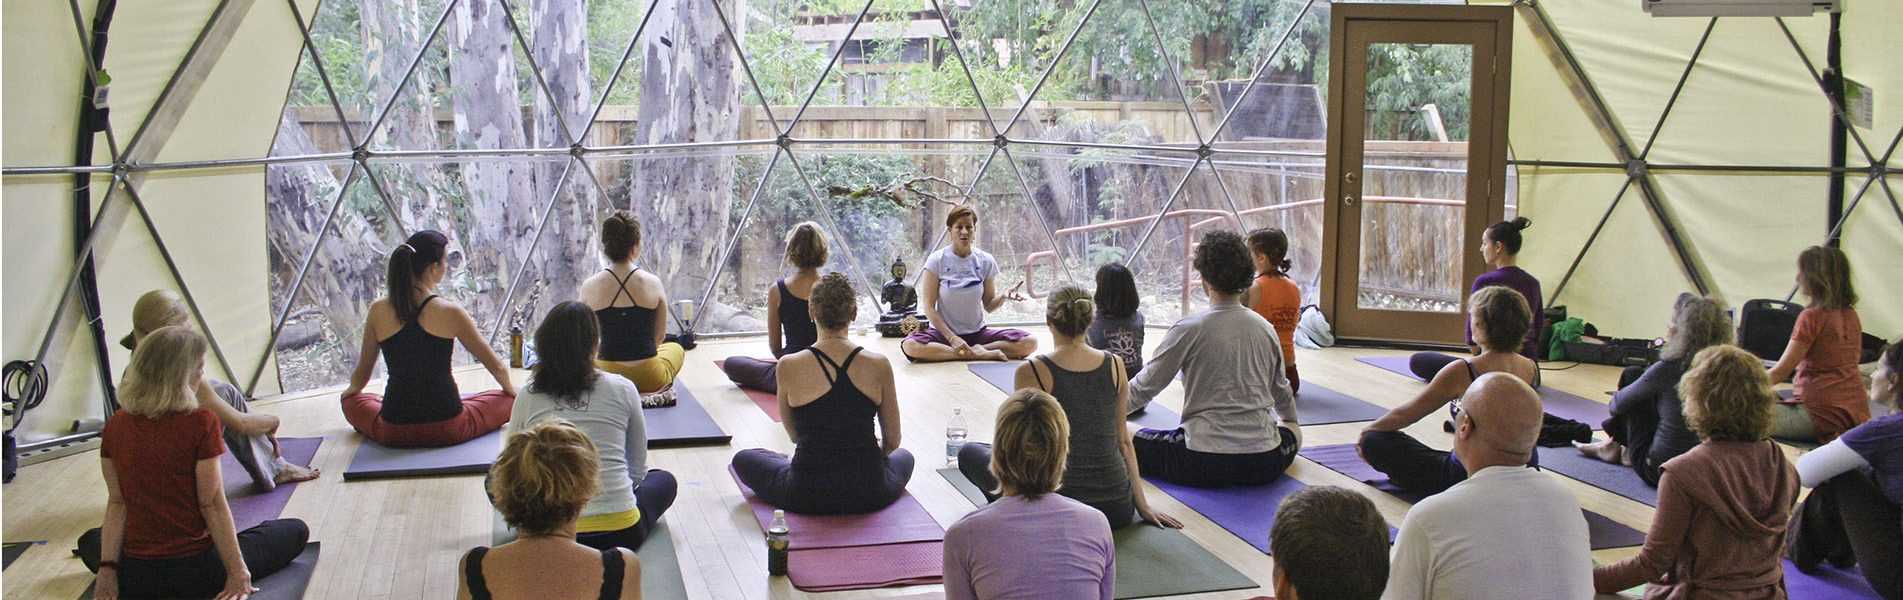 Hot Yoga Dome for Sale, The Hot Yoga Dome